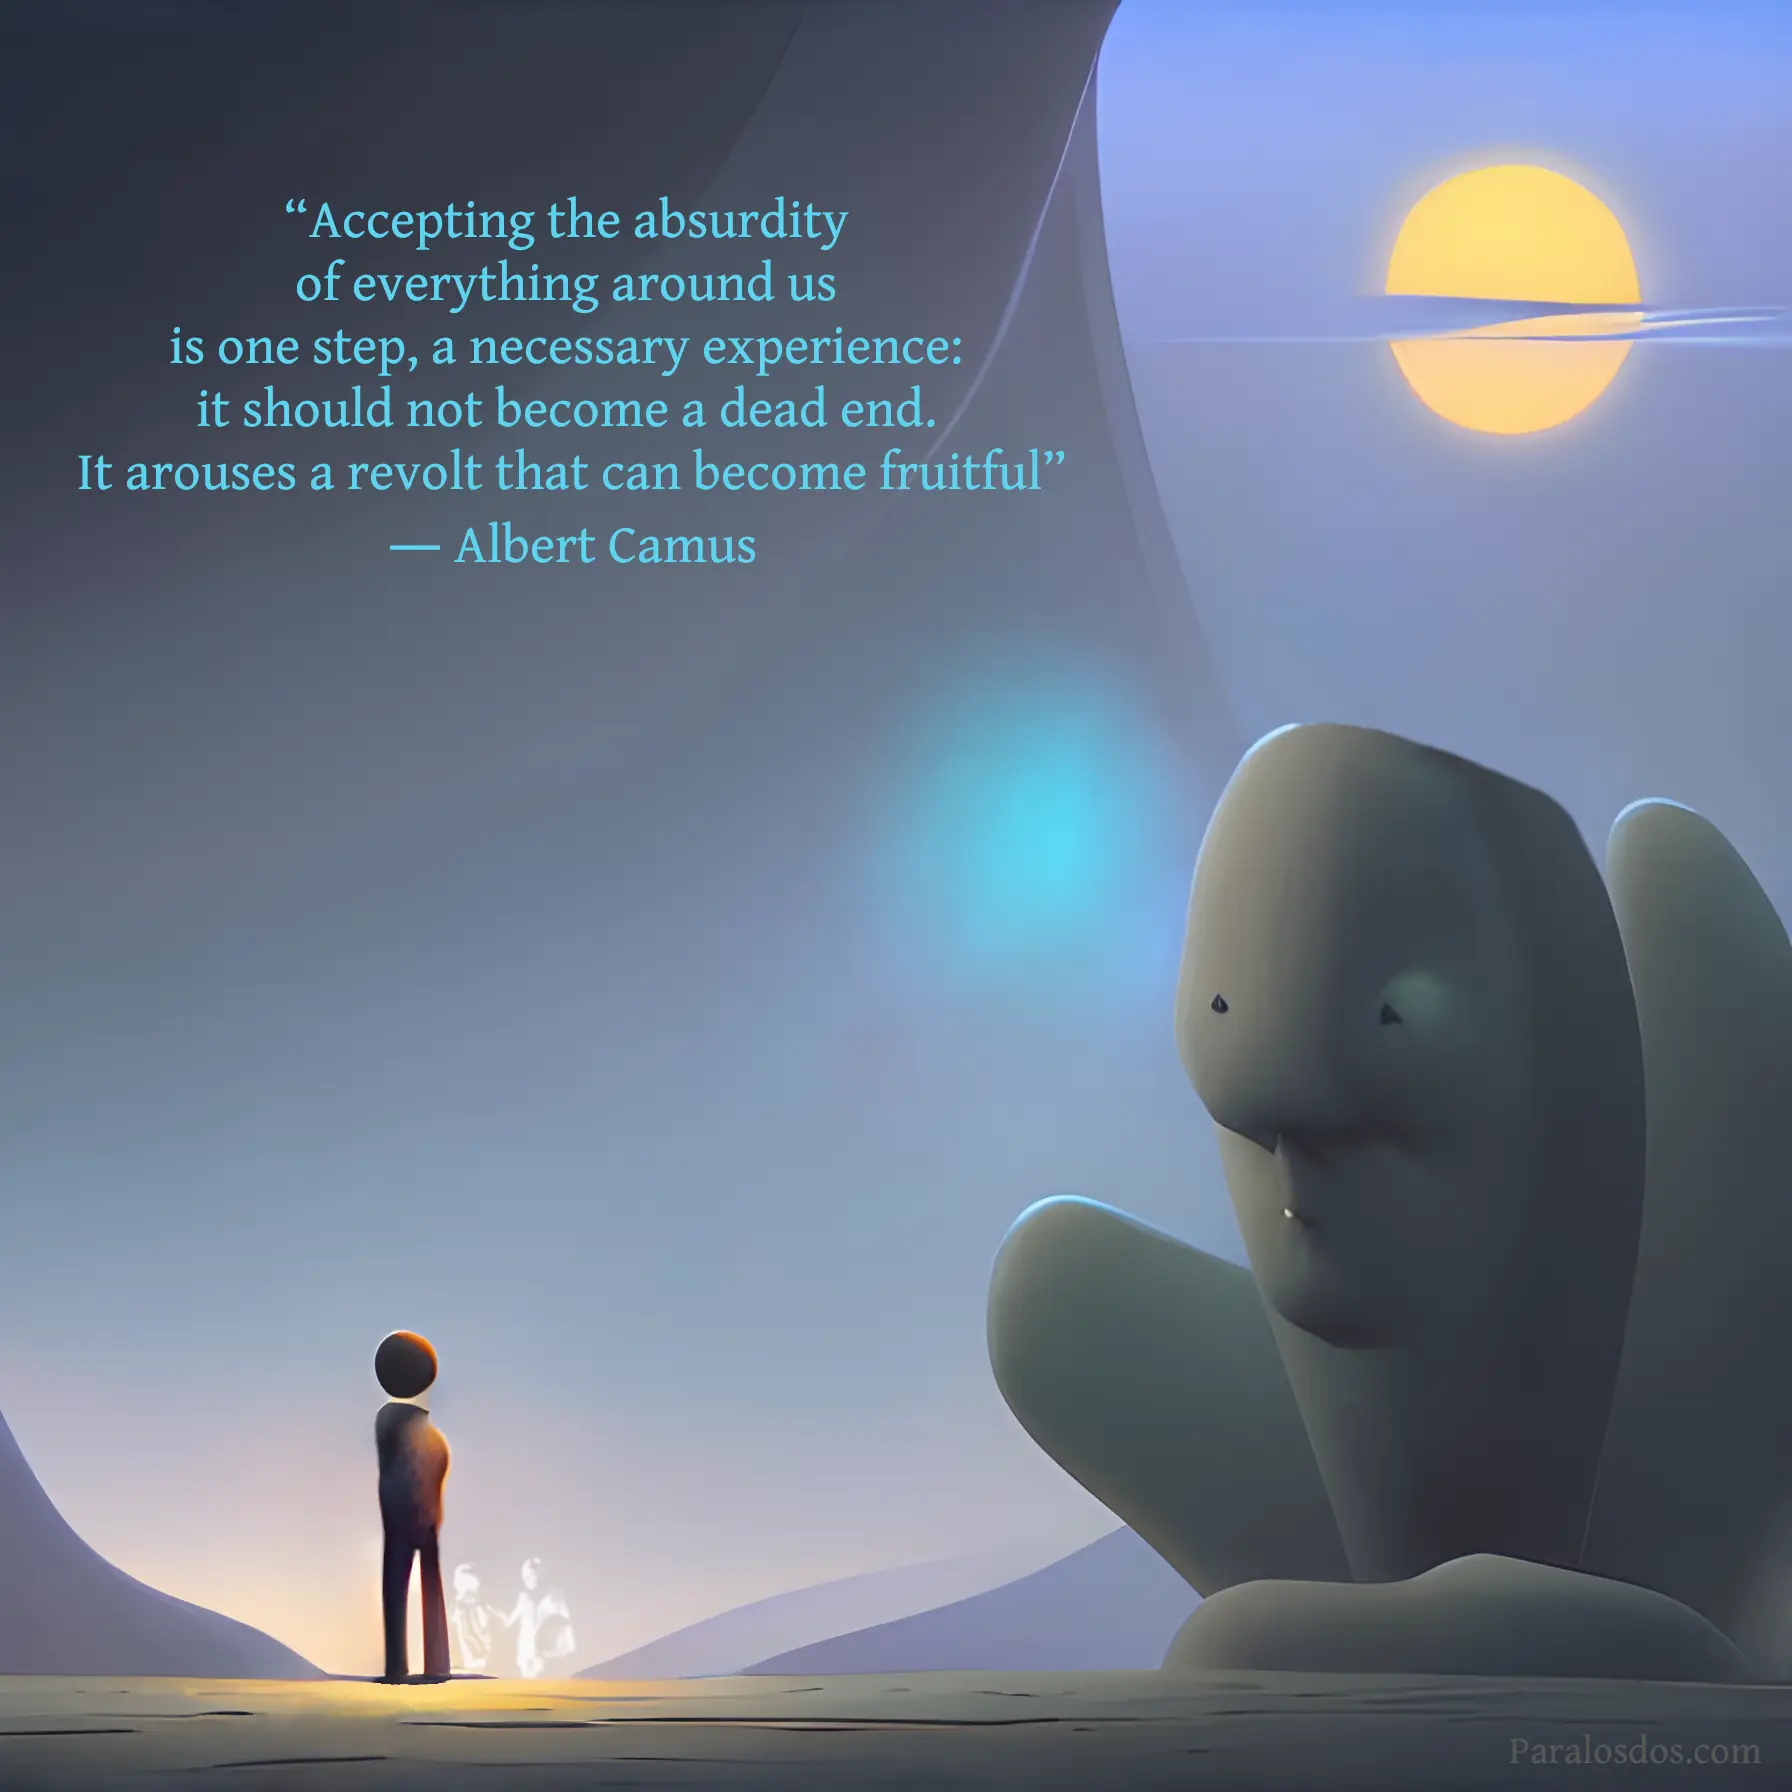 A fantastical artistic rendering of a figure being watched by a huge stone carving of a head. The quote reads: “Accepting the absurdity of everything around us is one step, a necessary experience: it should not become a dead end. It arouses a revolt that can become fruitful” Albert Camus